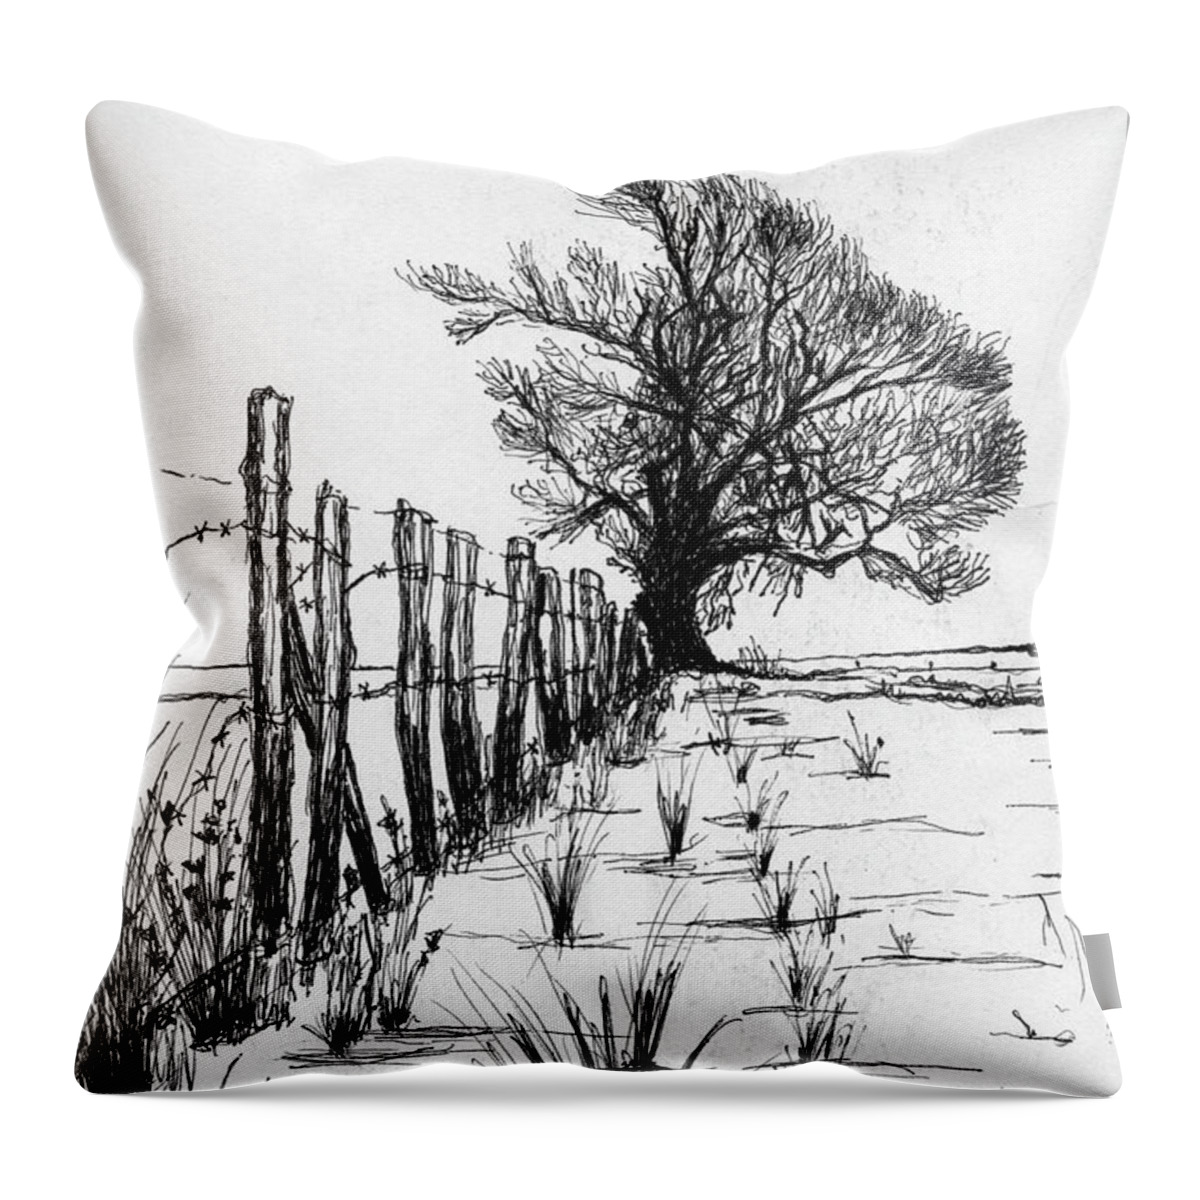 Ink On Paper Throw Pillow featuring the drawing Frozen Landscape Canada by Michael Krief